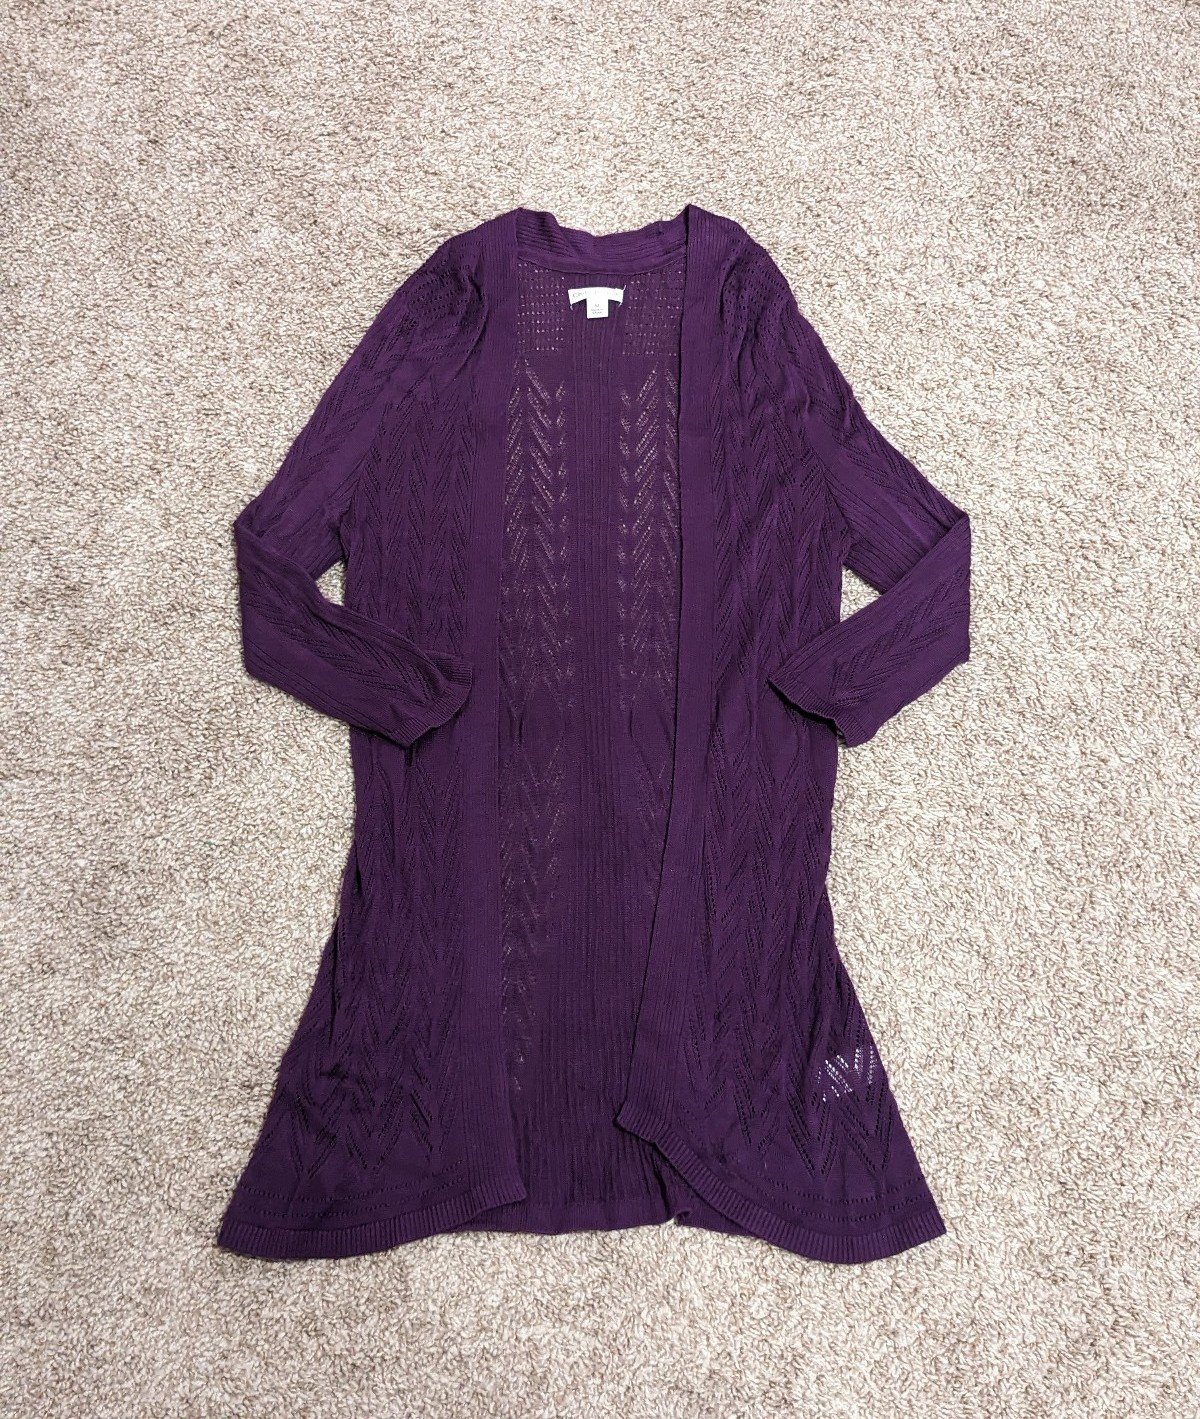 Exclusive Basic long purple Croft and Barrow open knit 